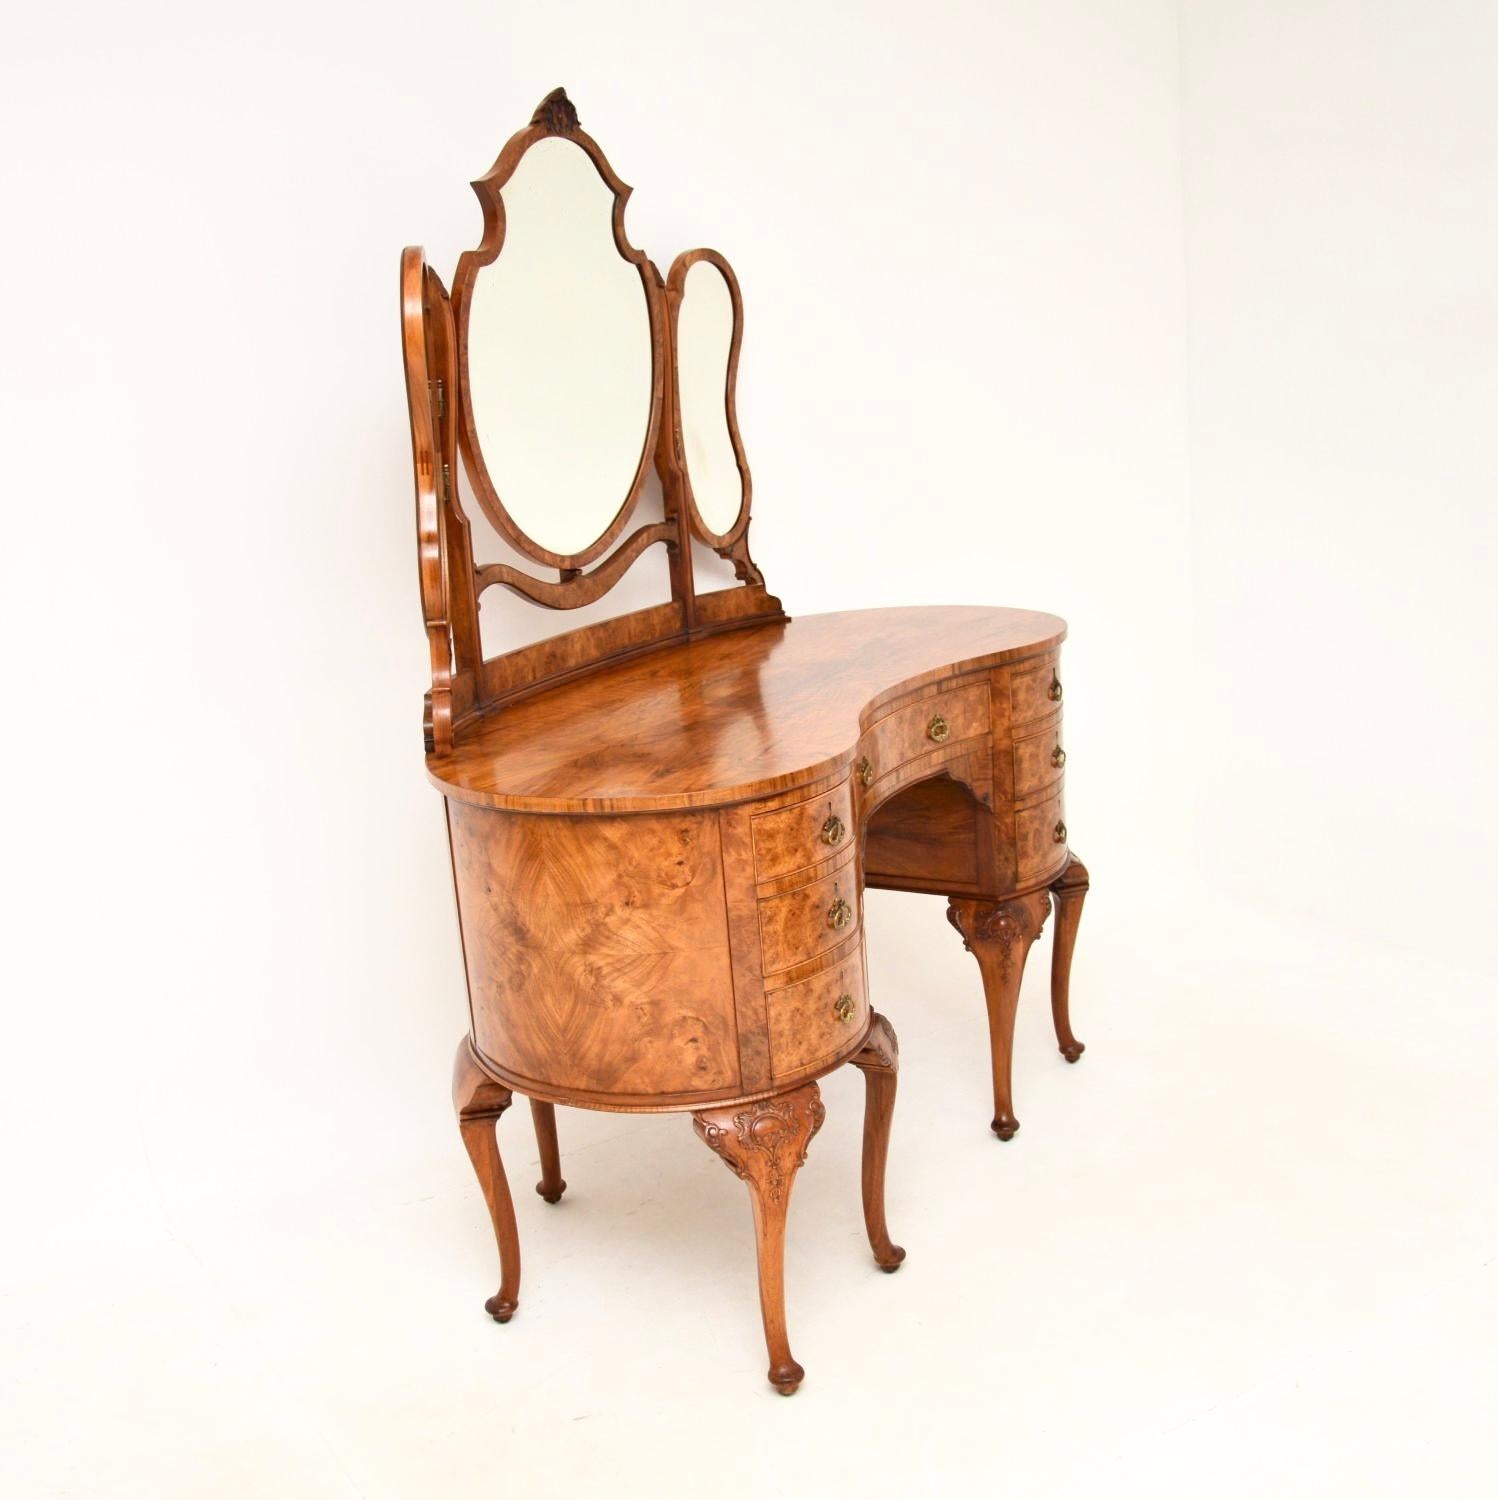 A stunning antique walnut kidney shaped dressing table and stool. This was made in England, it dates from the 1900-1920 period.

The quality is outstanding, this is a large and impressive size. The walnut grain patterns and colour tones are